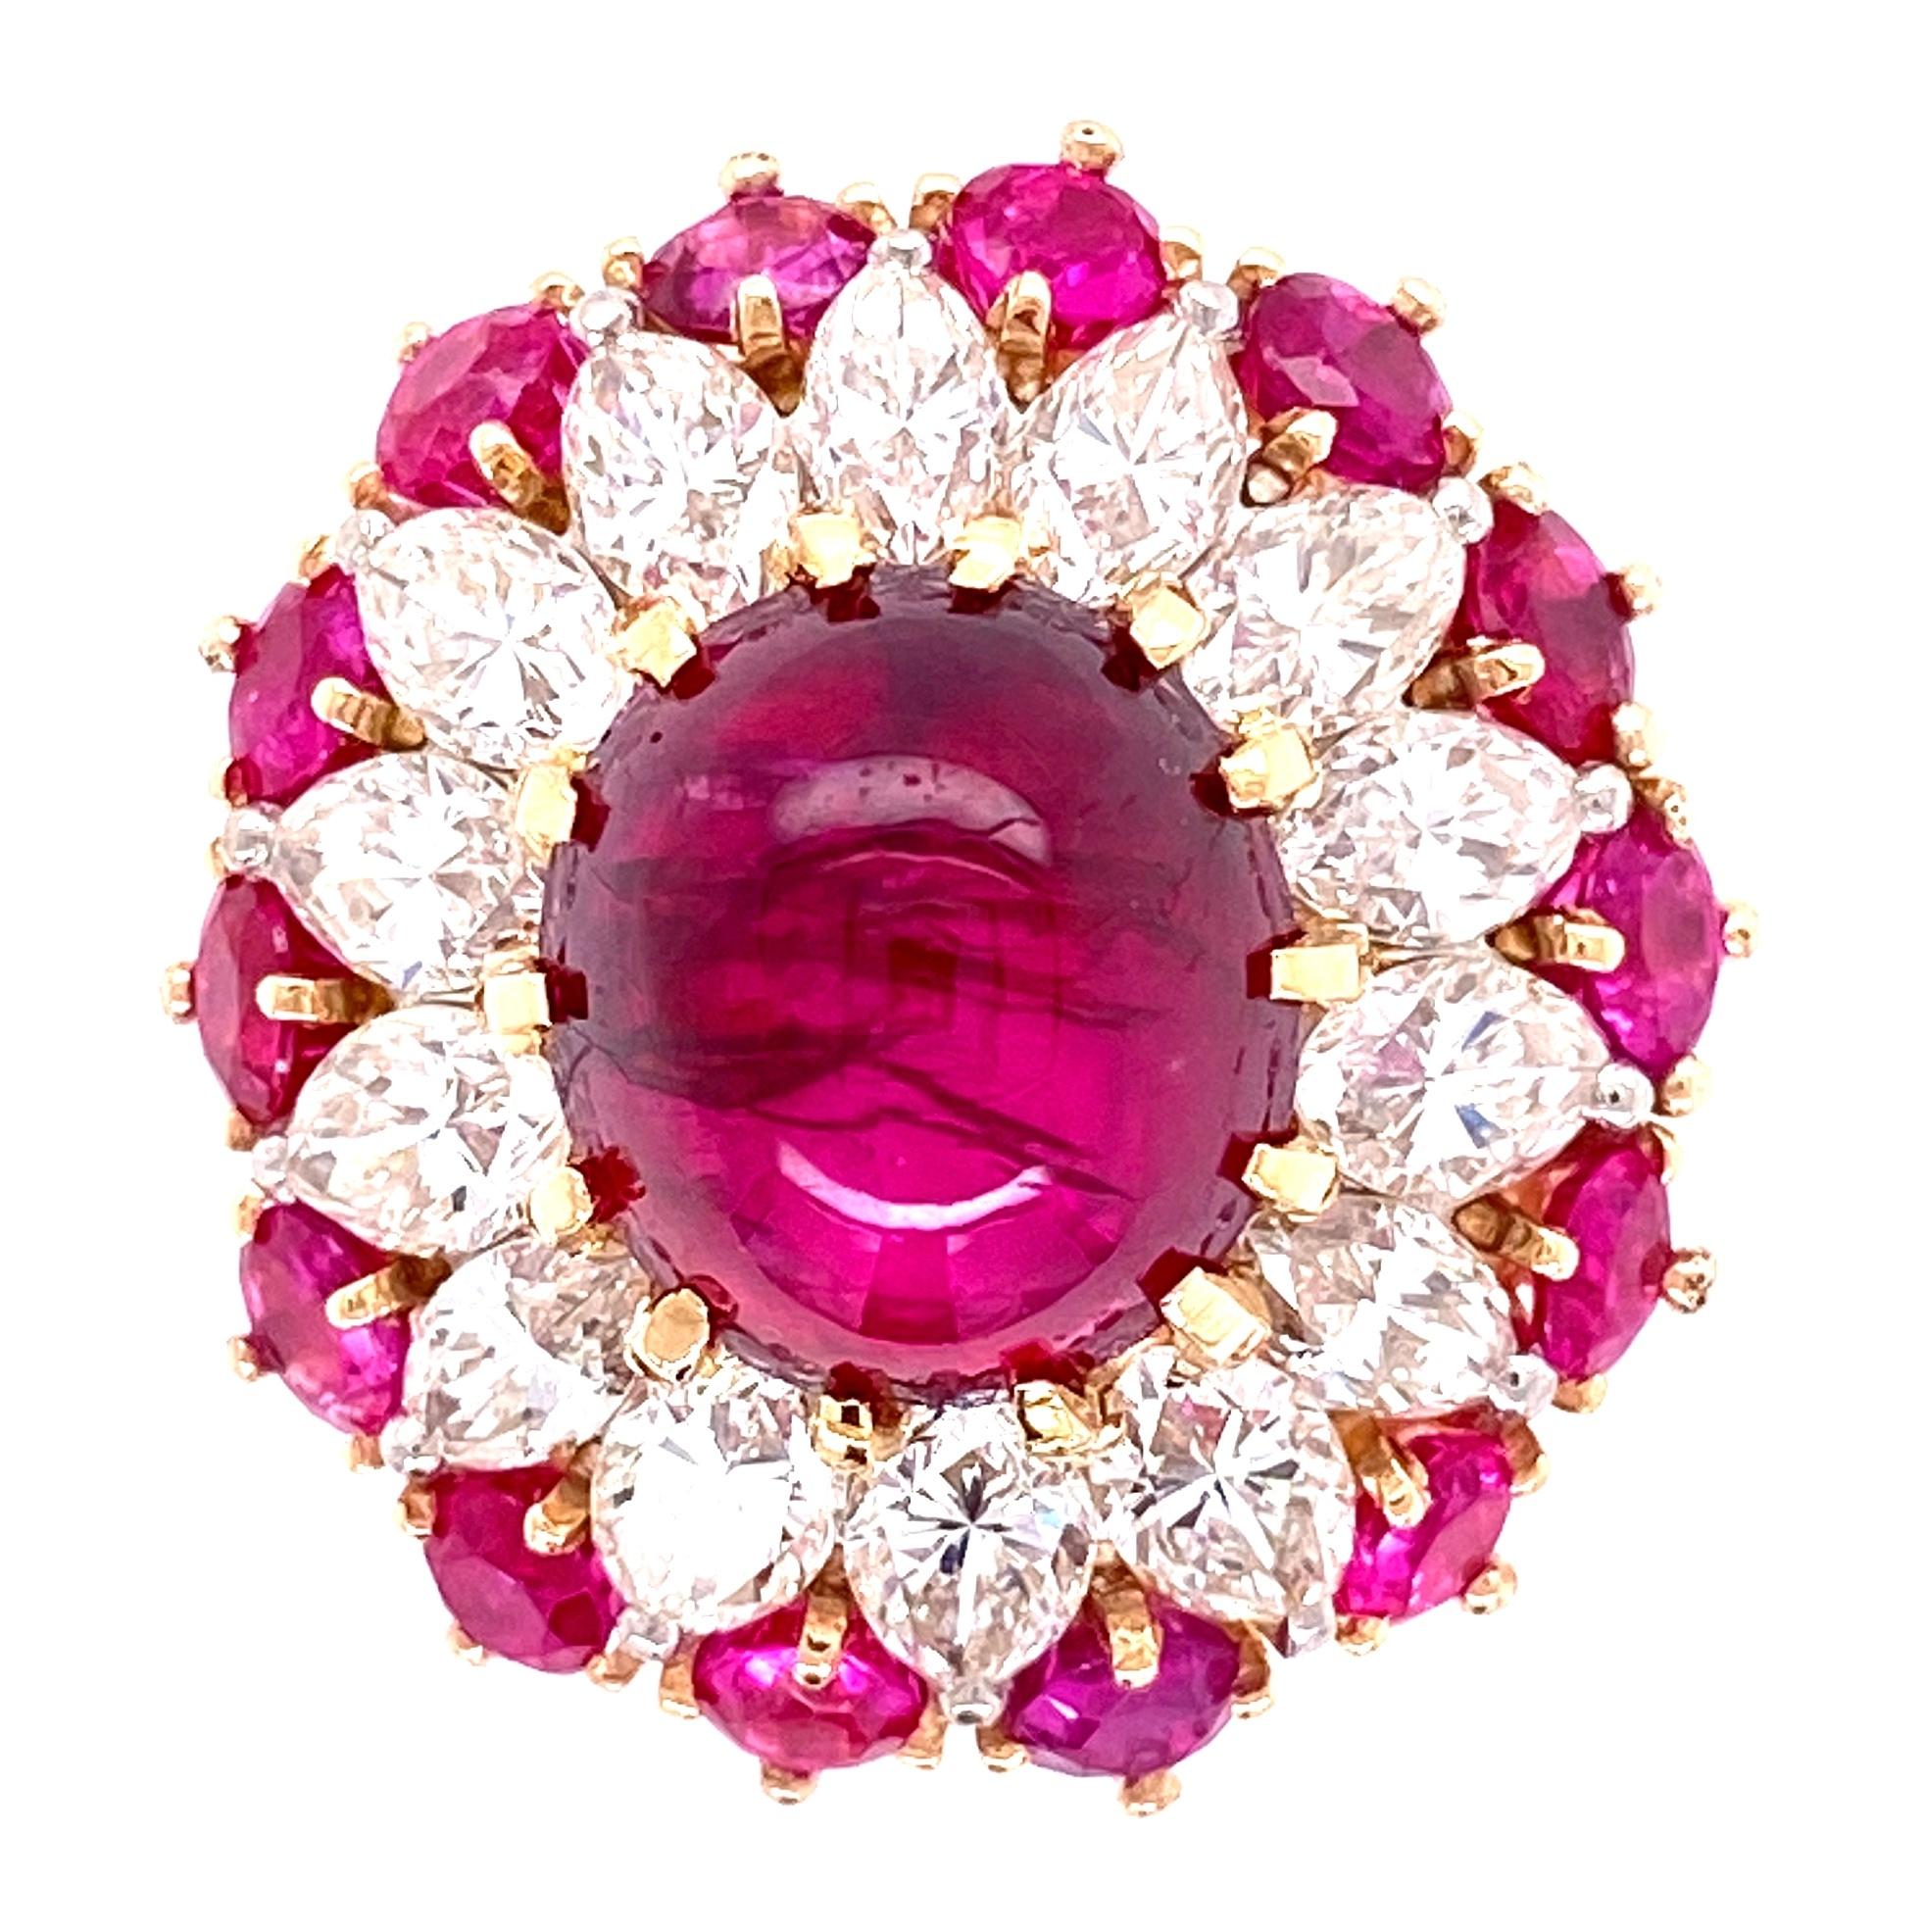 Simply Fabulous! Ruby and Diamond Platinum and Gold Bombay design Cocktail Ring. Centering a securely nestled Hand set GIA Natural Untreated No Heat Ruby weighing 4.91 Carat. The center stone has been removed and replaced to get the exact weight of